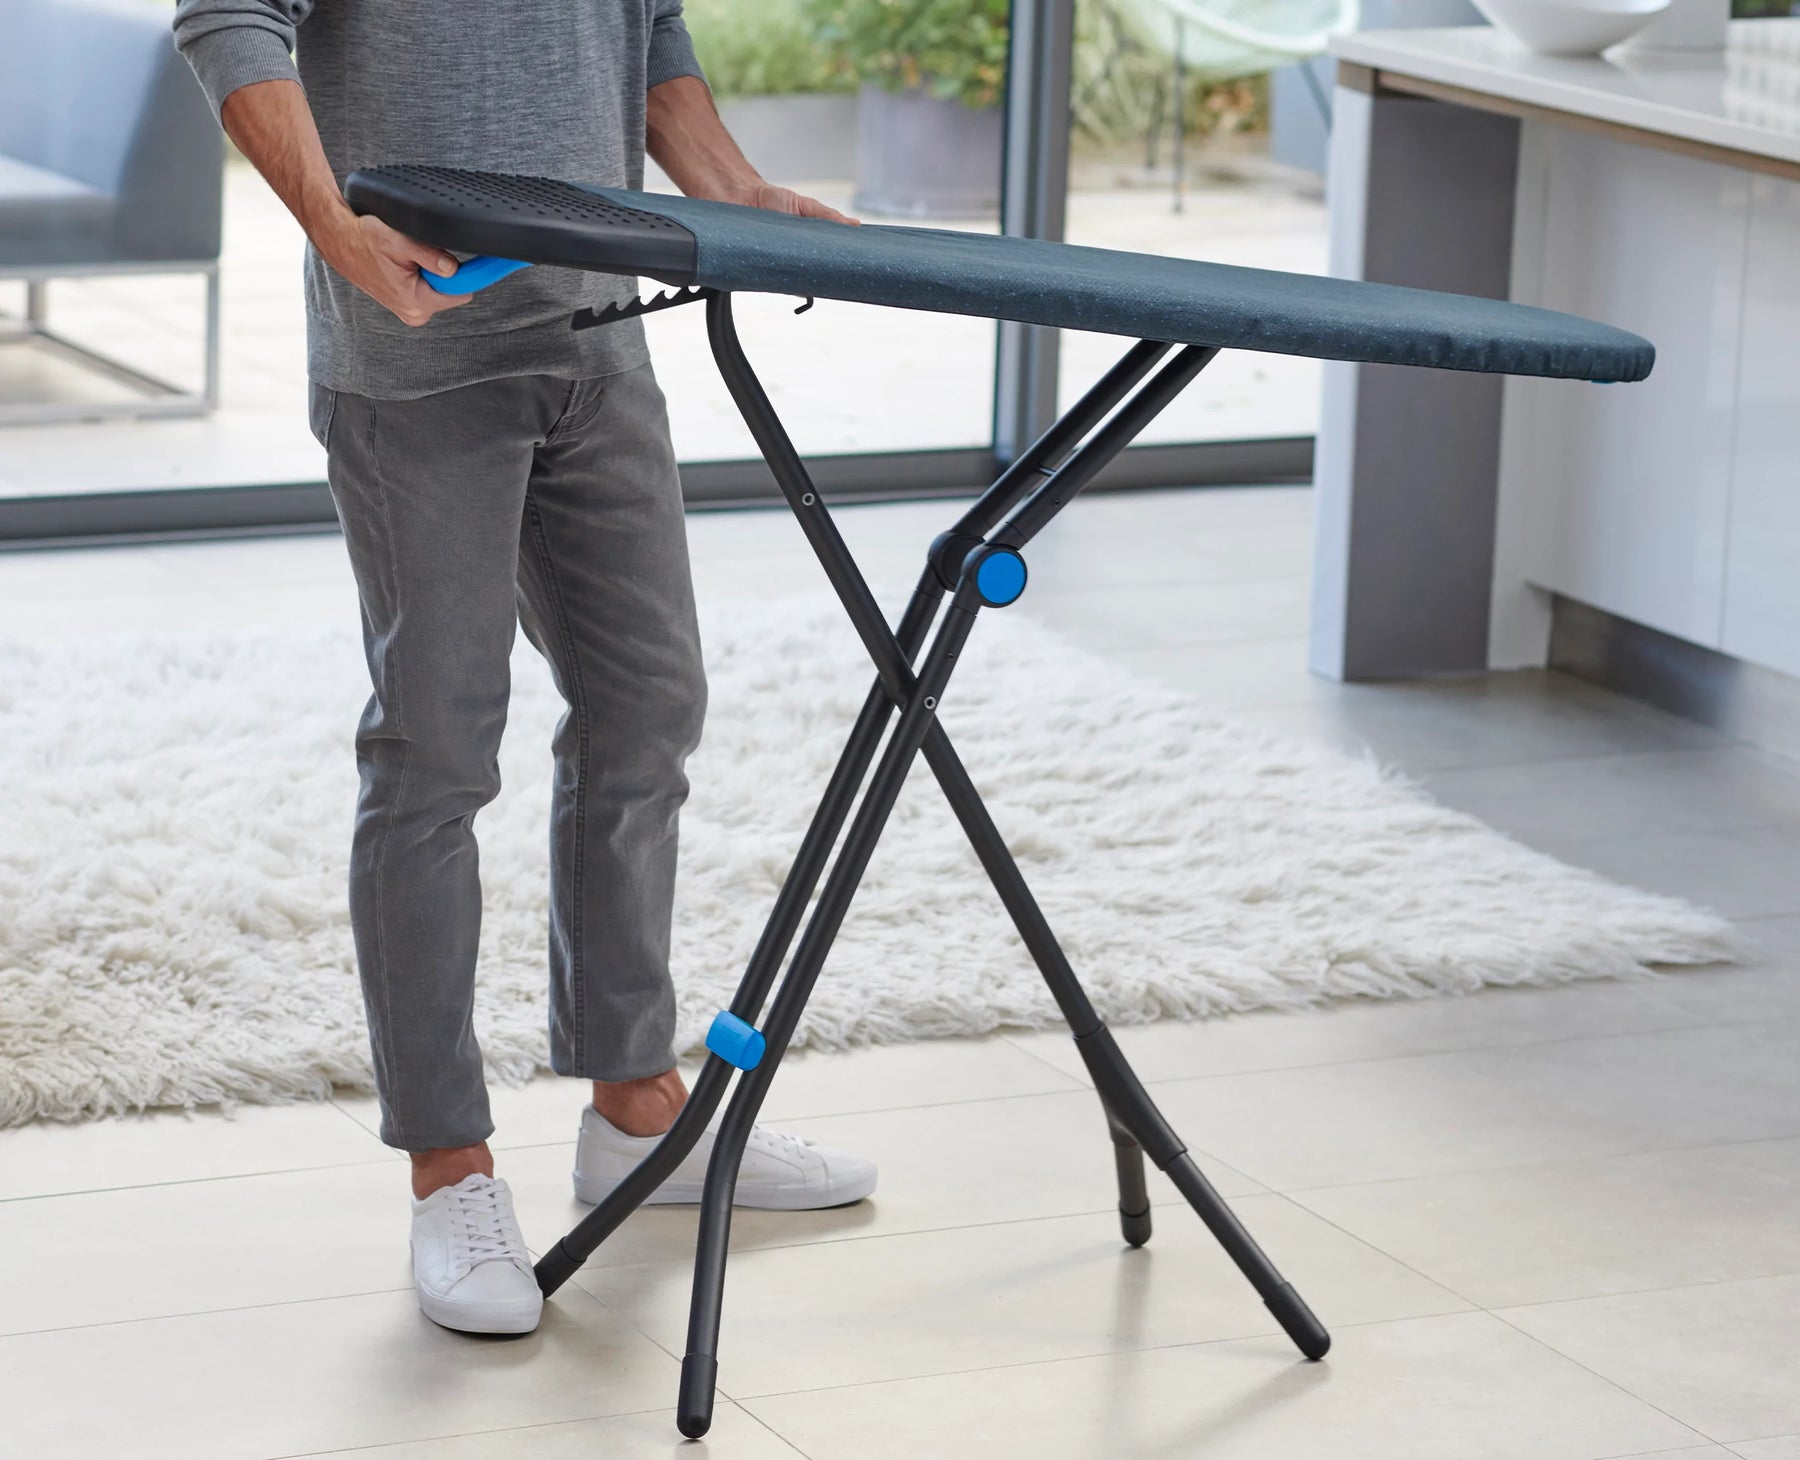 Glide Plus Easy-store Ironing Board - Image 5